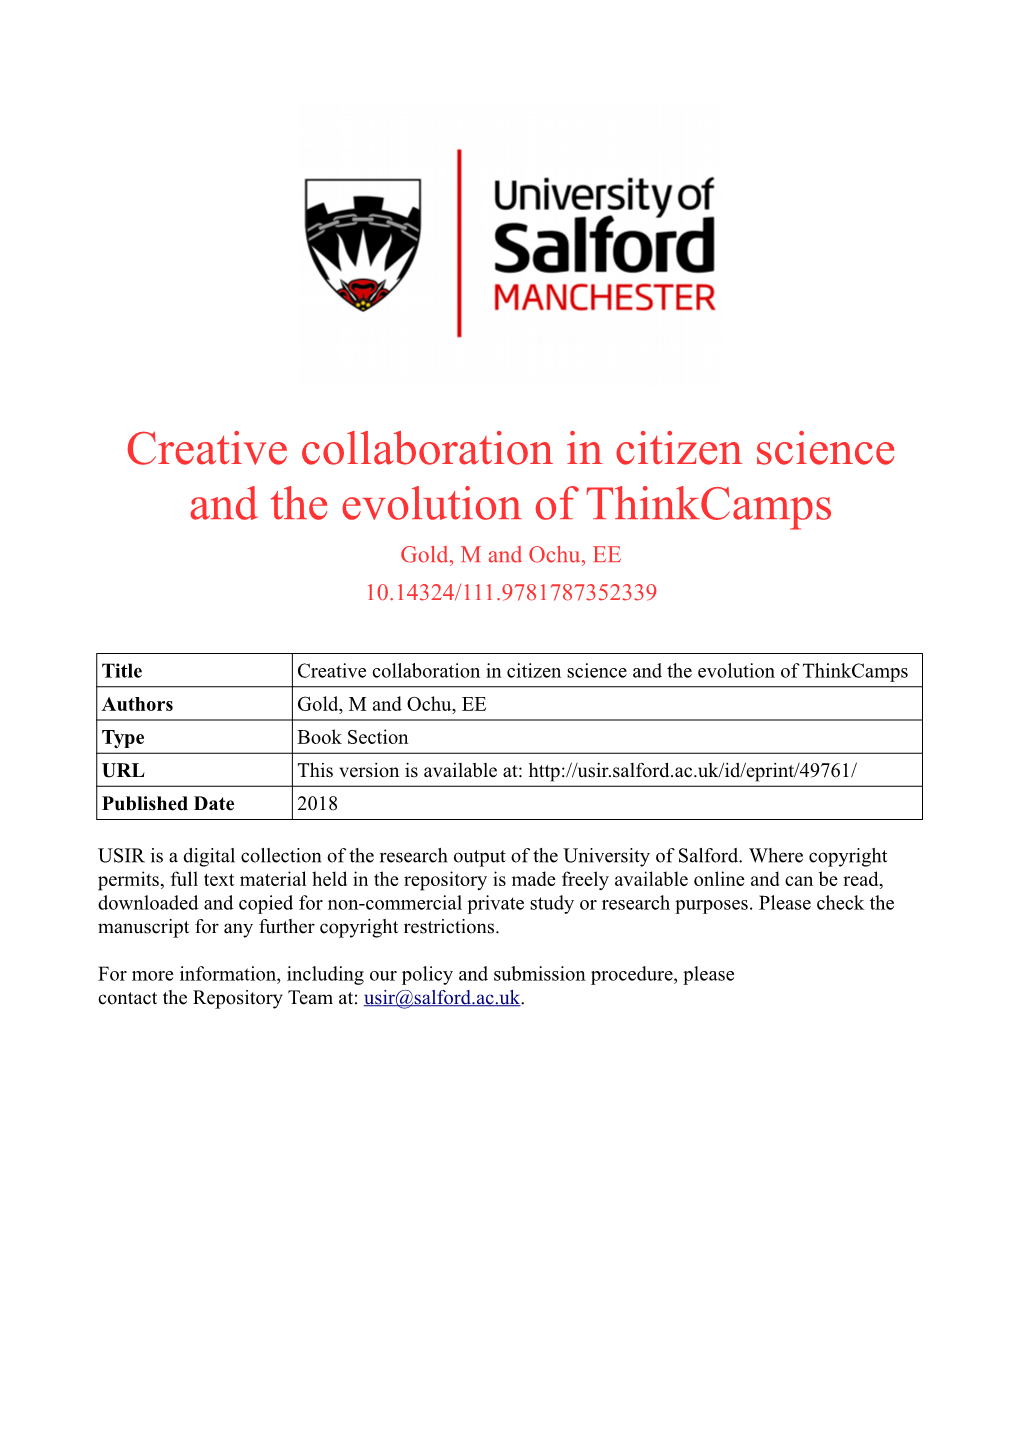 Citizen Science and the Evolution of Thinkcamps Gold, M and Ochu, EE 10.14324/111.9781787352339